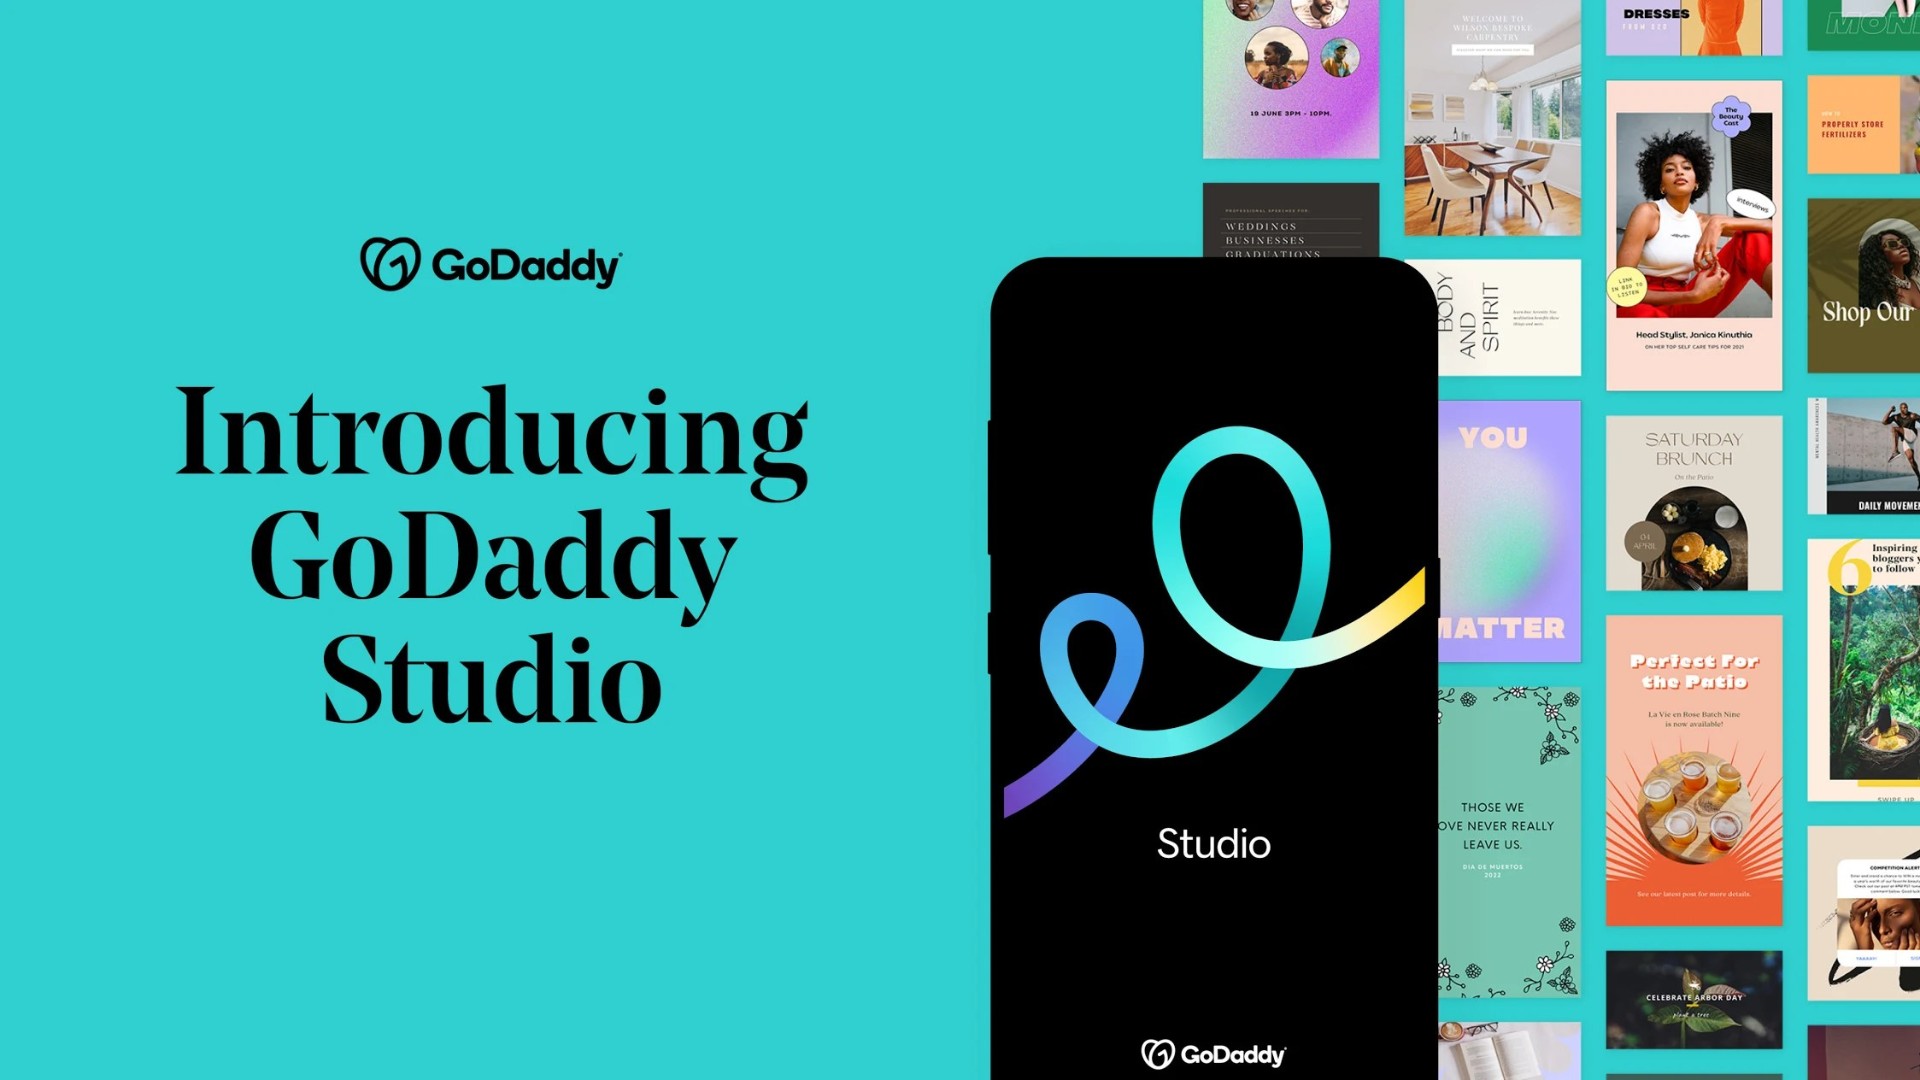 Make Quick Images with Text for Instagram - Learn How in the GoDaddy Studio App